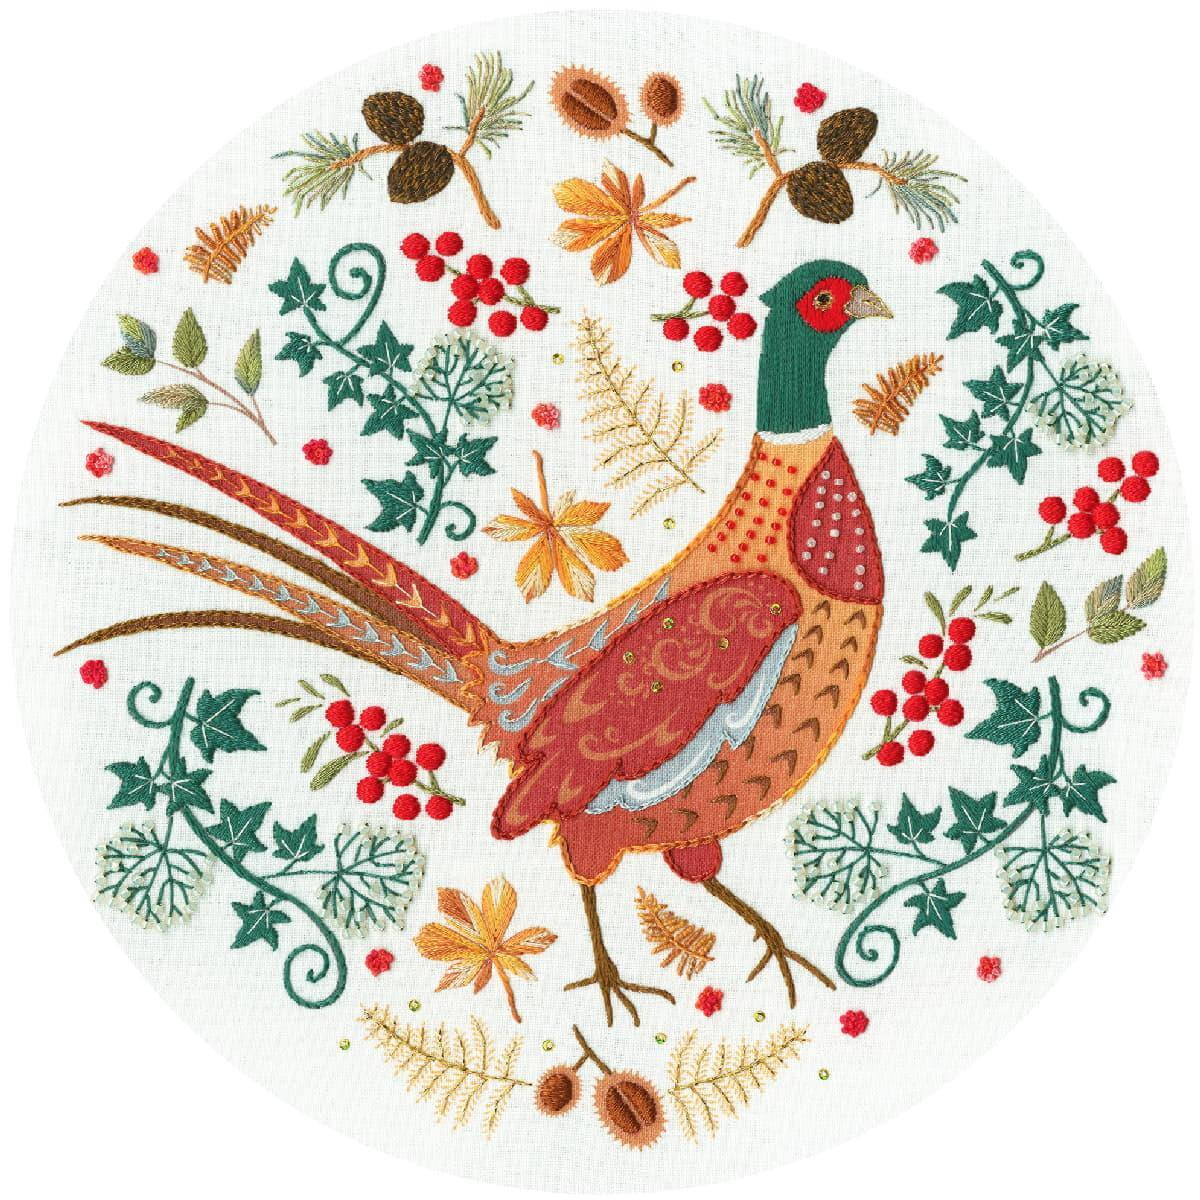 A circular embroidery design features a colorful pheasant...